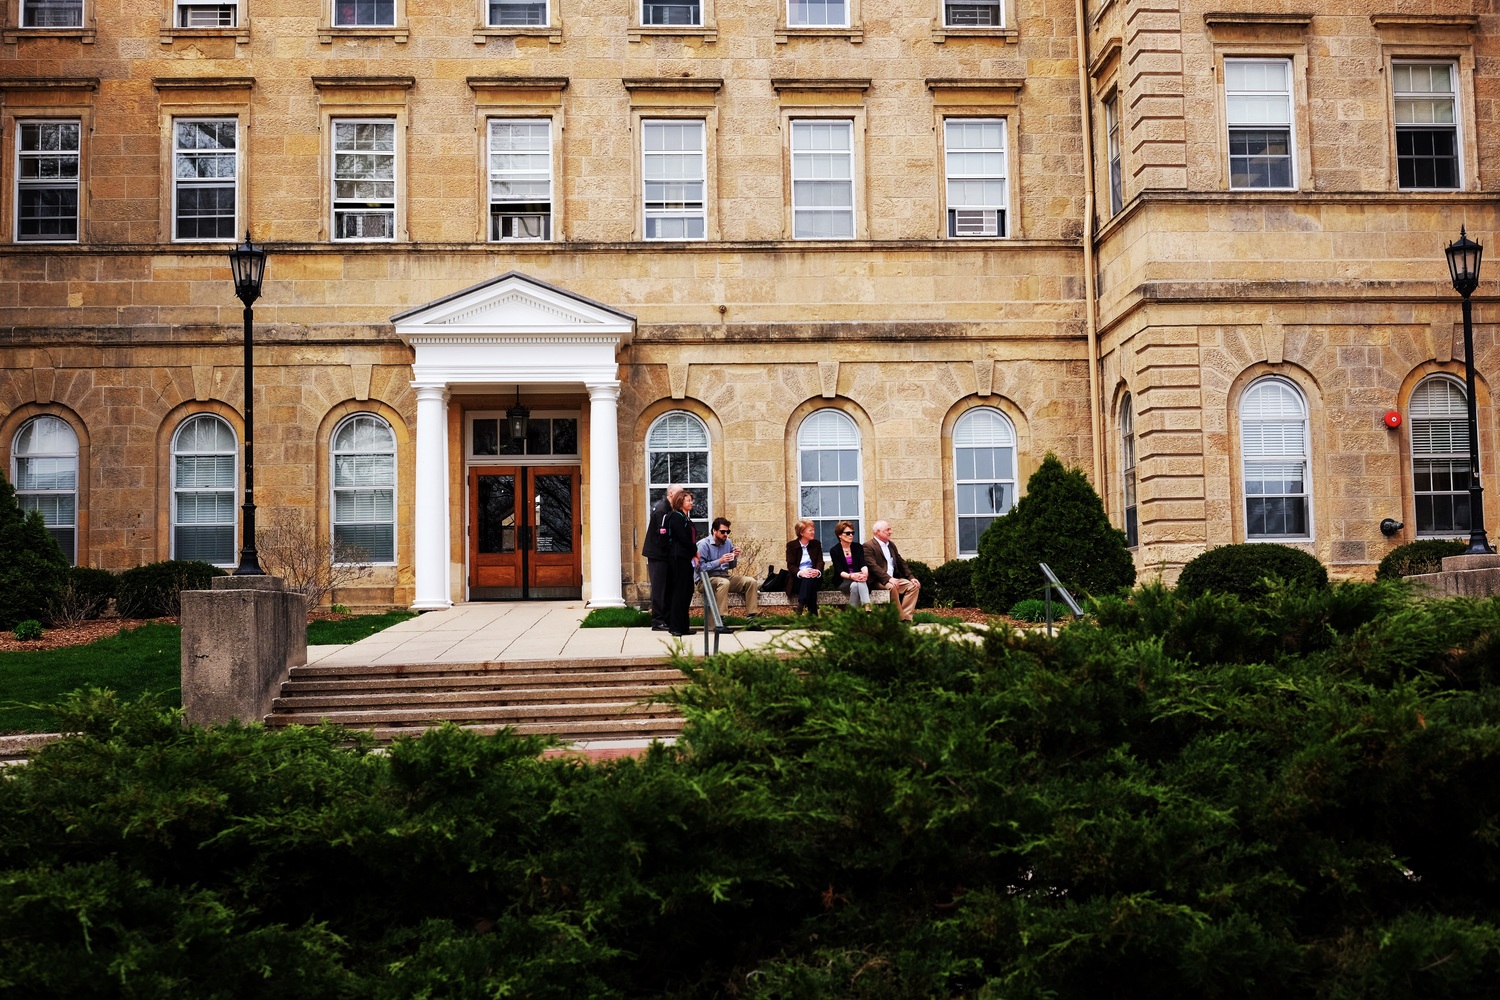 Dean of Students Lori Berquam, Provost Sarah Mangelsdorf, and others observe from afar just outside their offices in Bascom Hall.